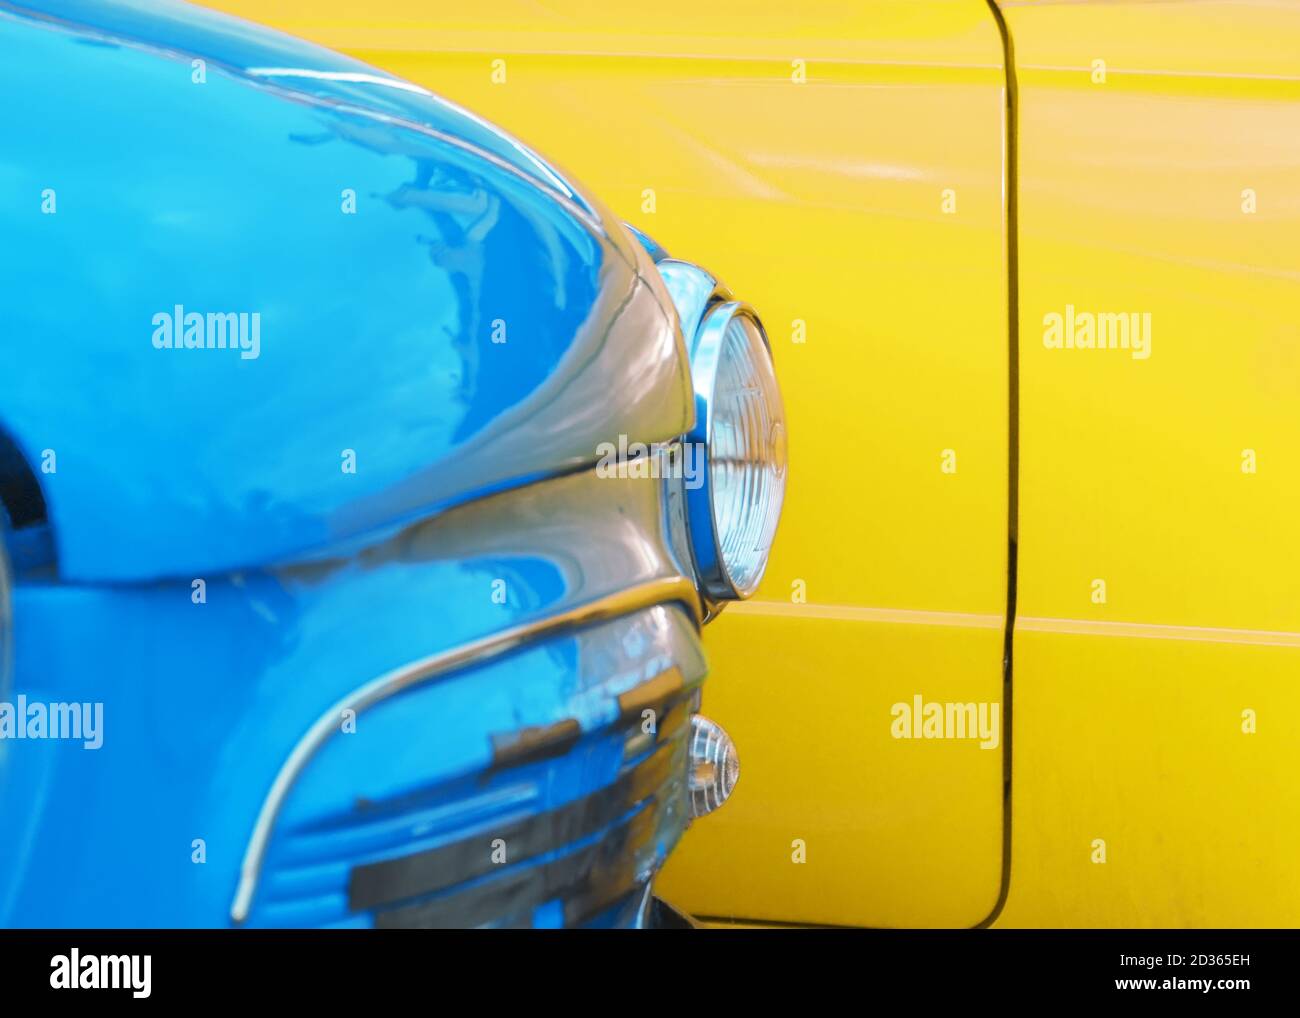 Headlight of a blue vintage car on the background of a yellow car close-up Stock Photo